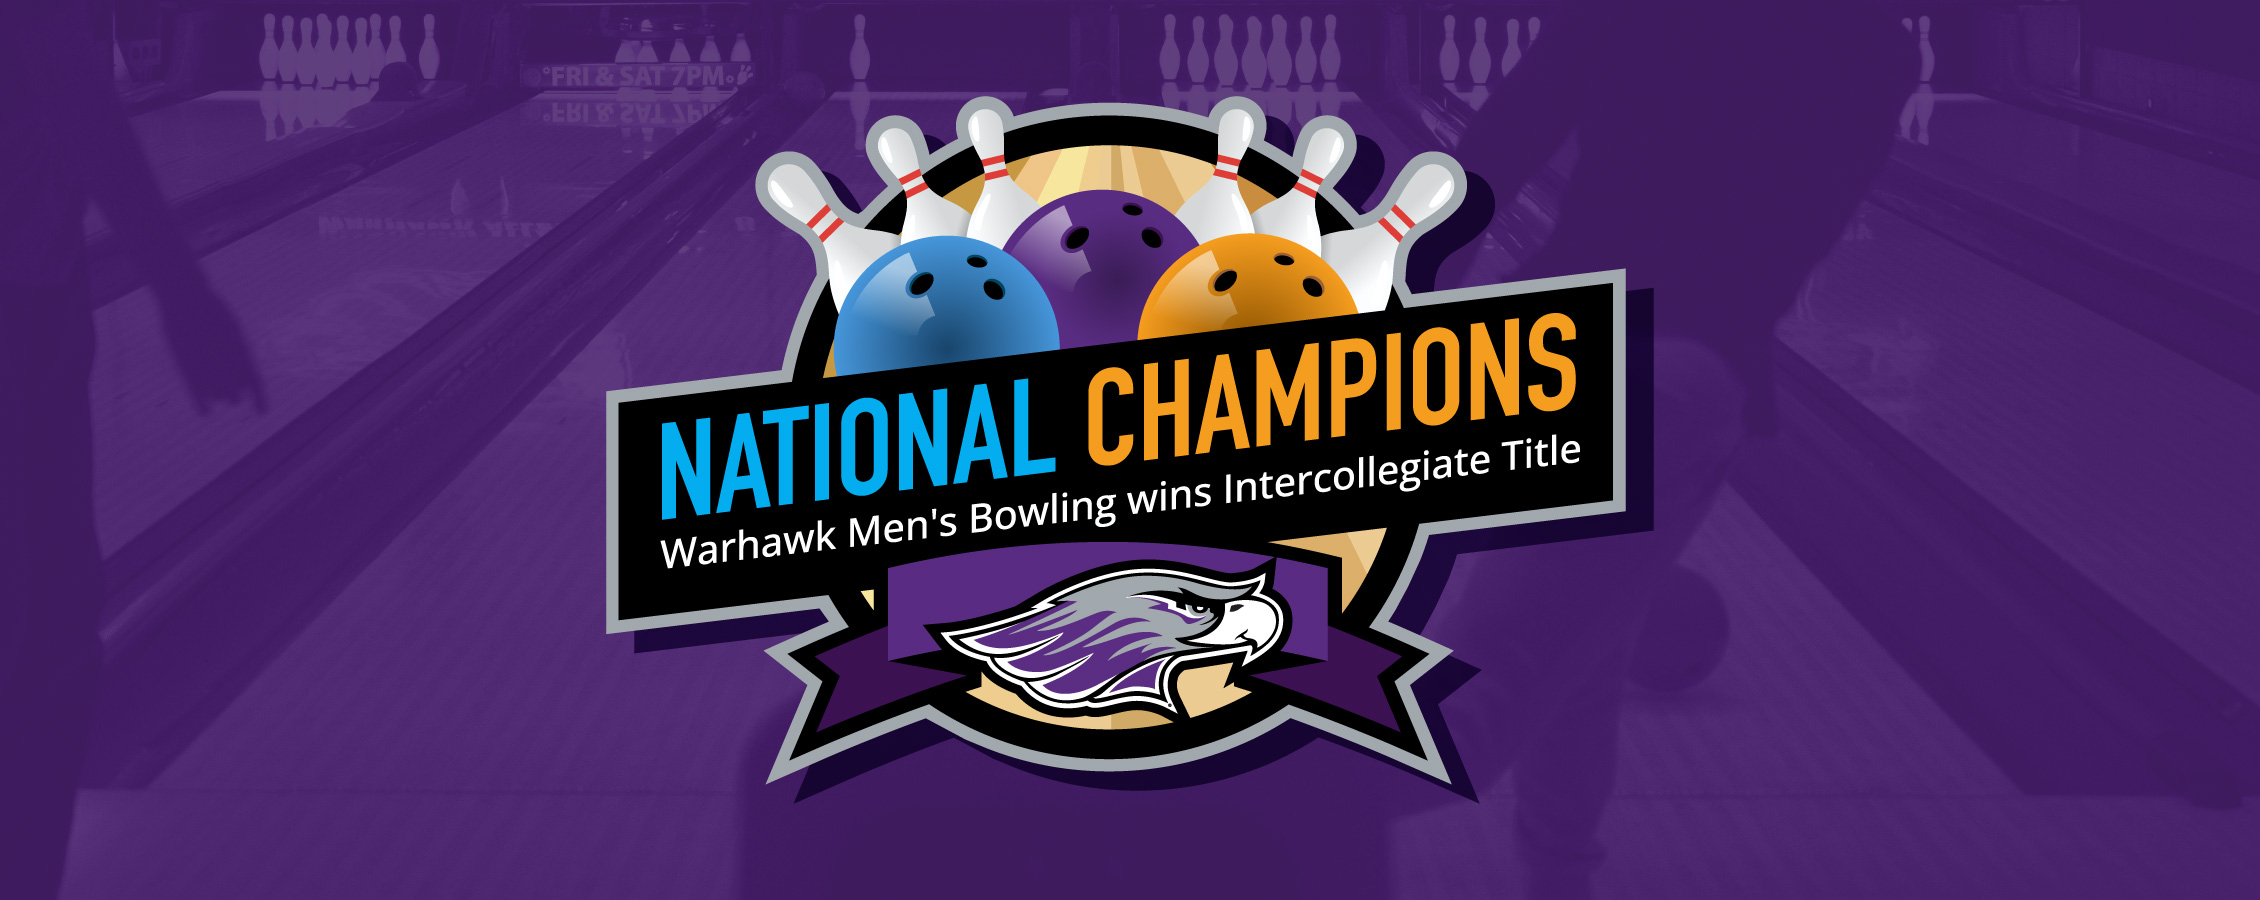 Bowling national champions graphic.